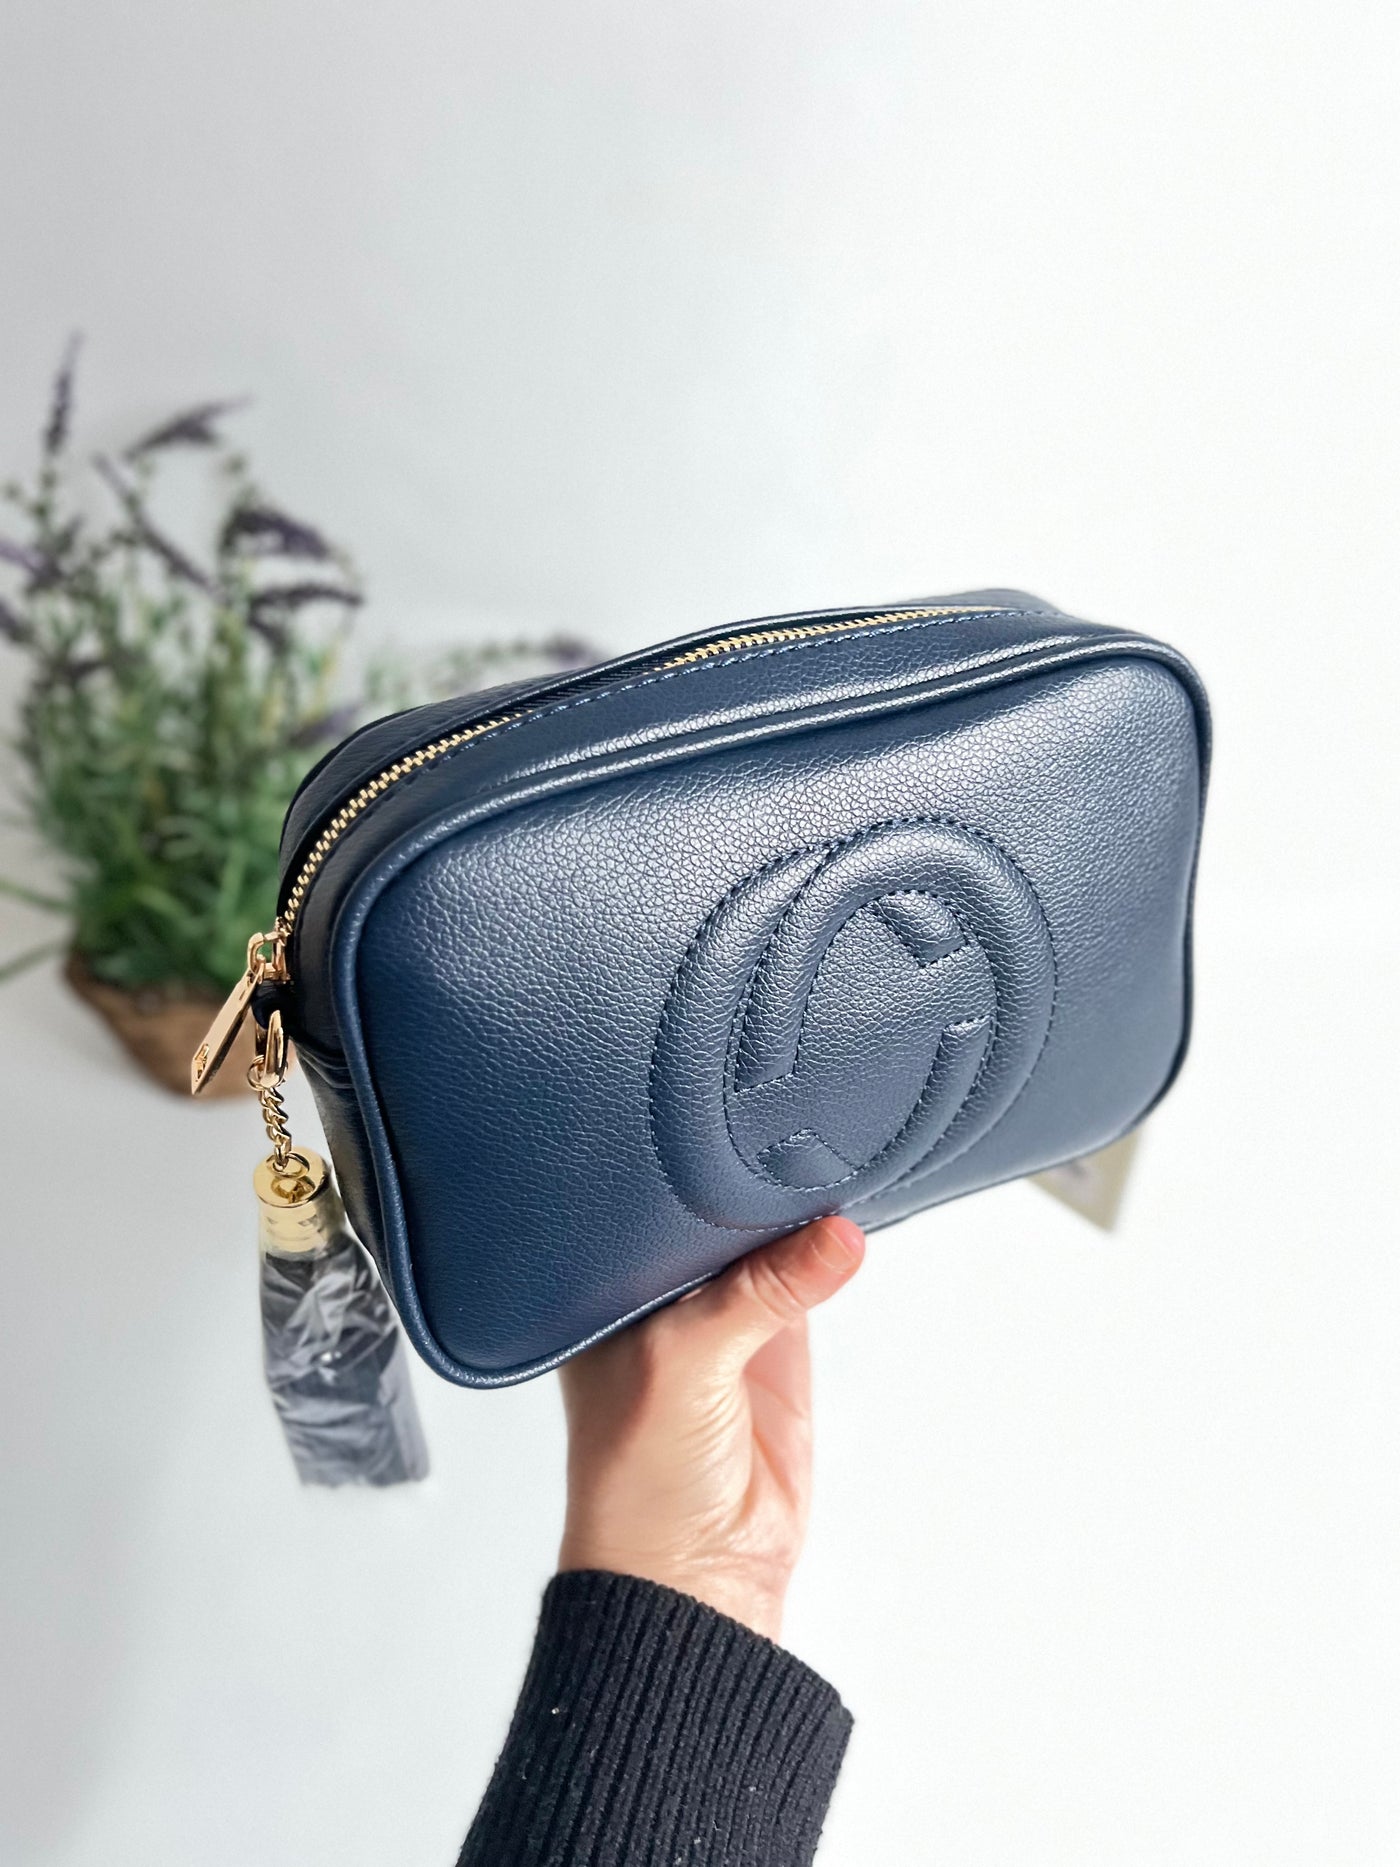 showing details of the zip closure of the navy blue crossbody bag